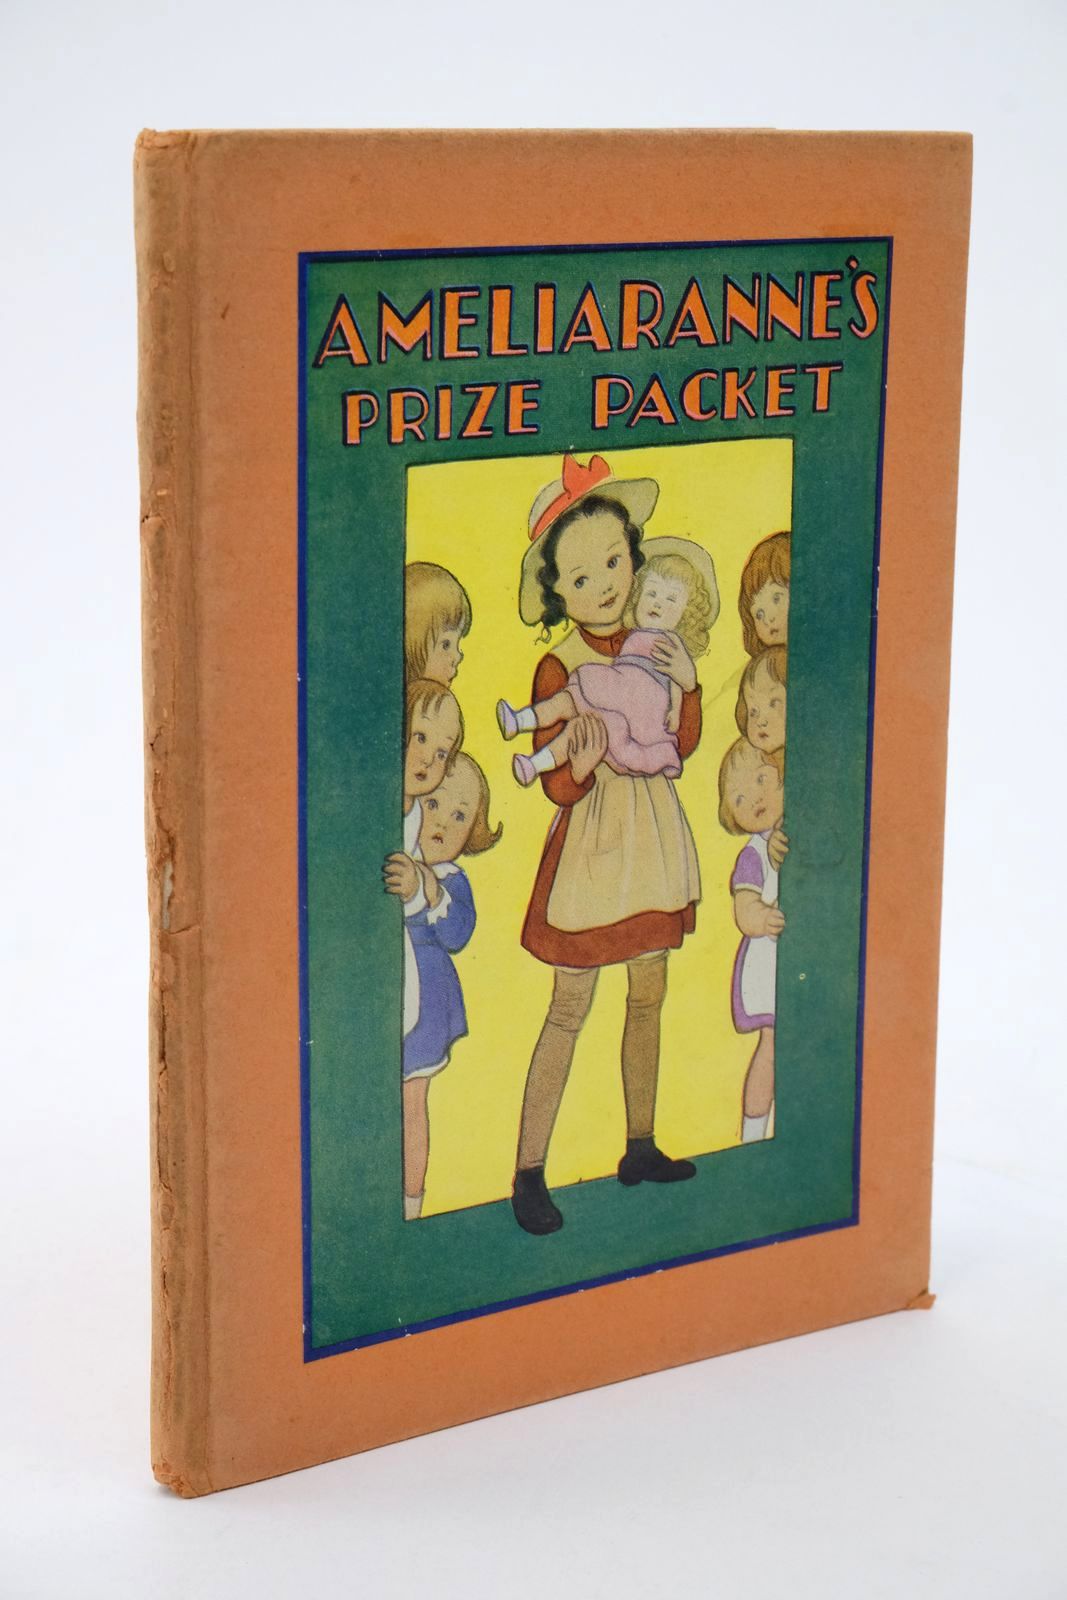 Photo of AMELIARANNE'S PRIZE PACKET written by Farjeon, Eleanor illustrated by Pearse, S.B. published by George G. Harrap & Co. Ltd. (STOCK CODE: 1322656)  for sale by Stella & Rose's Books